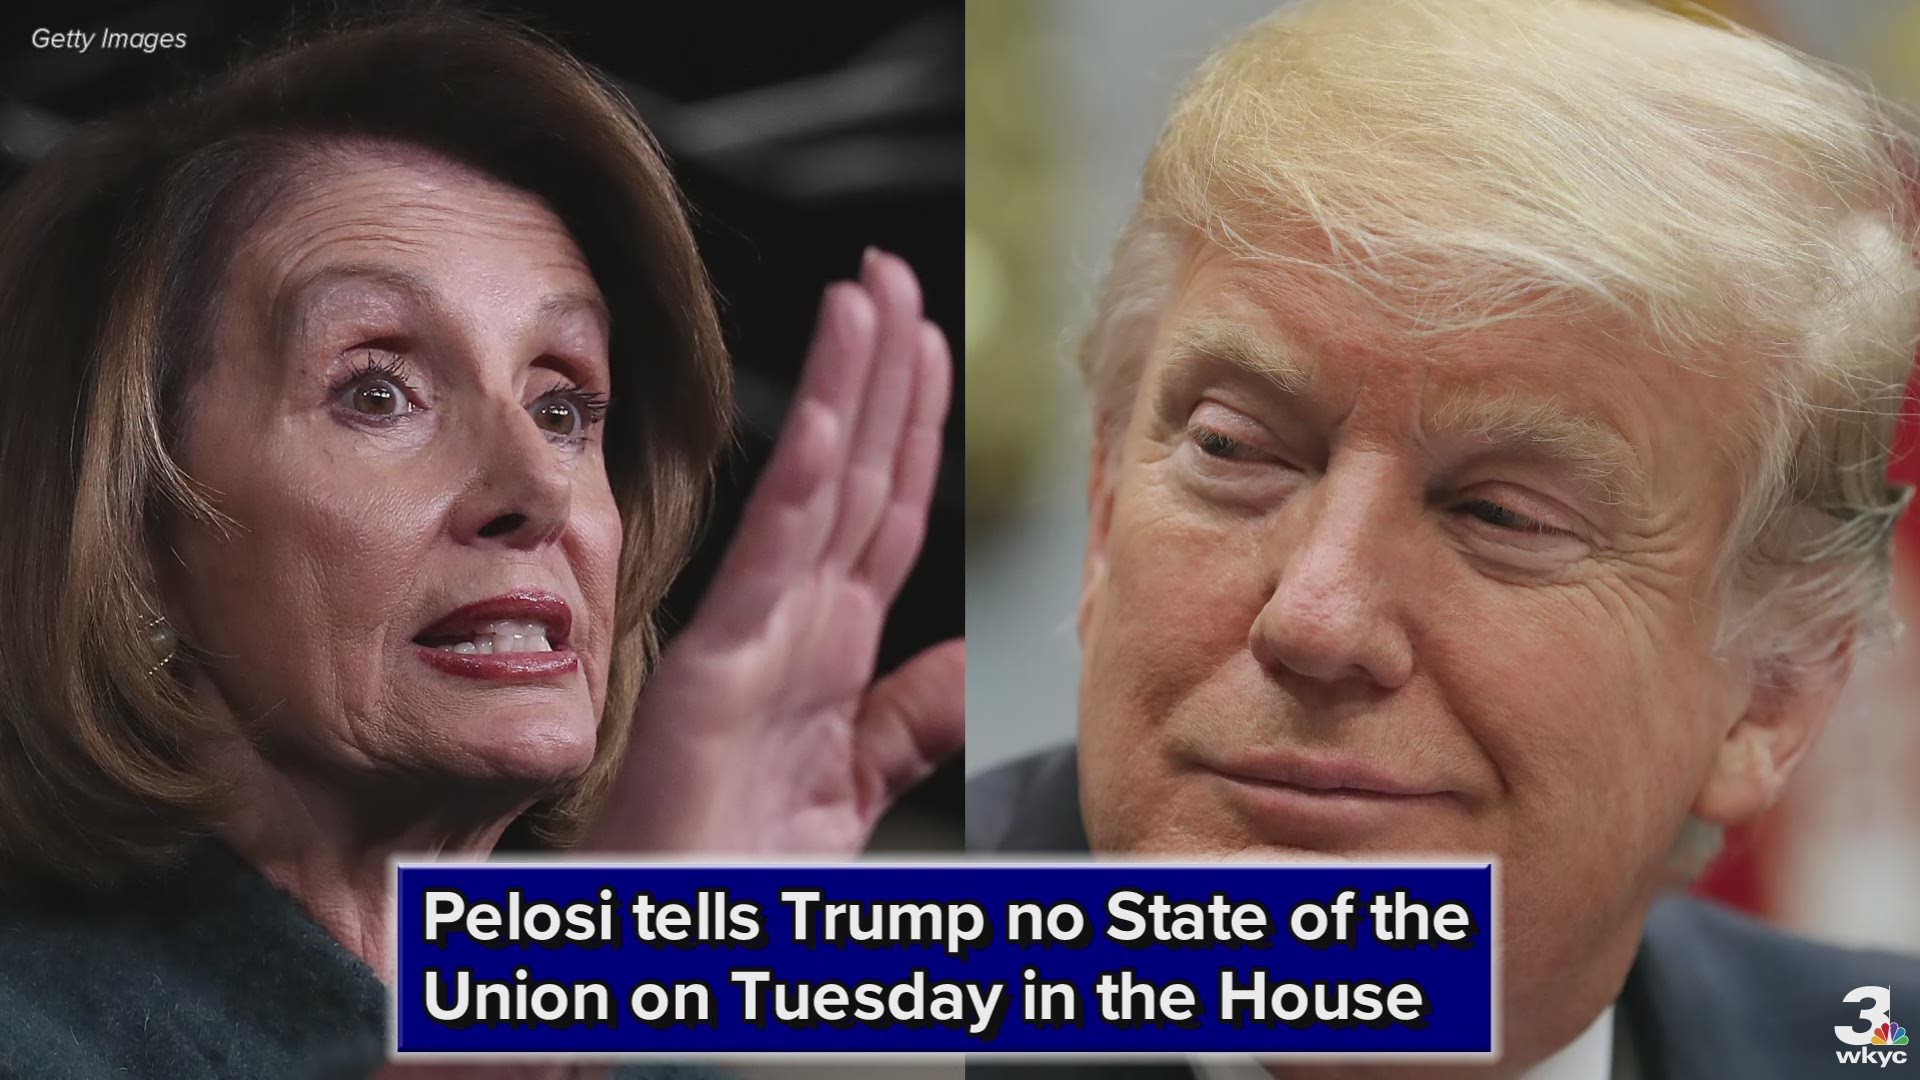 Pelosi acted just hours after Trump notified her that he was planning to deliver the speech next Tuesday in line with her original invitation.